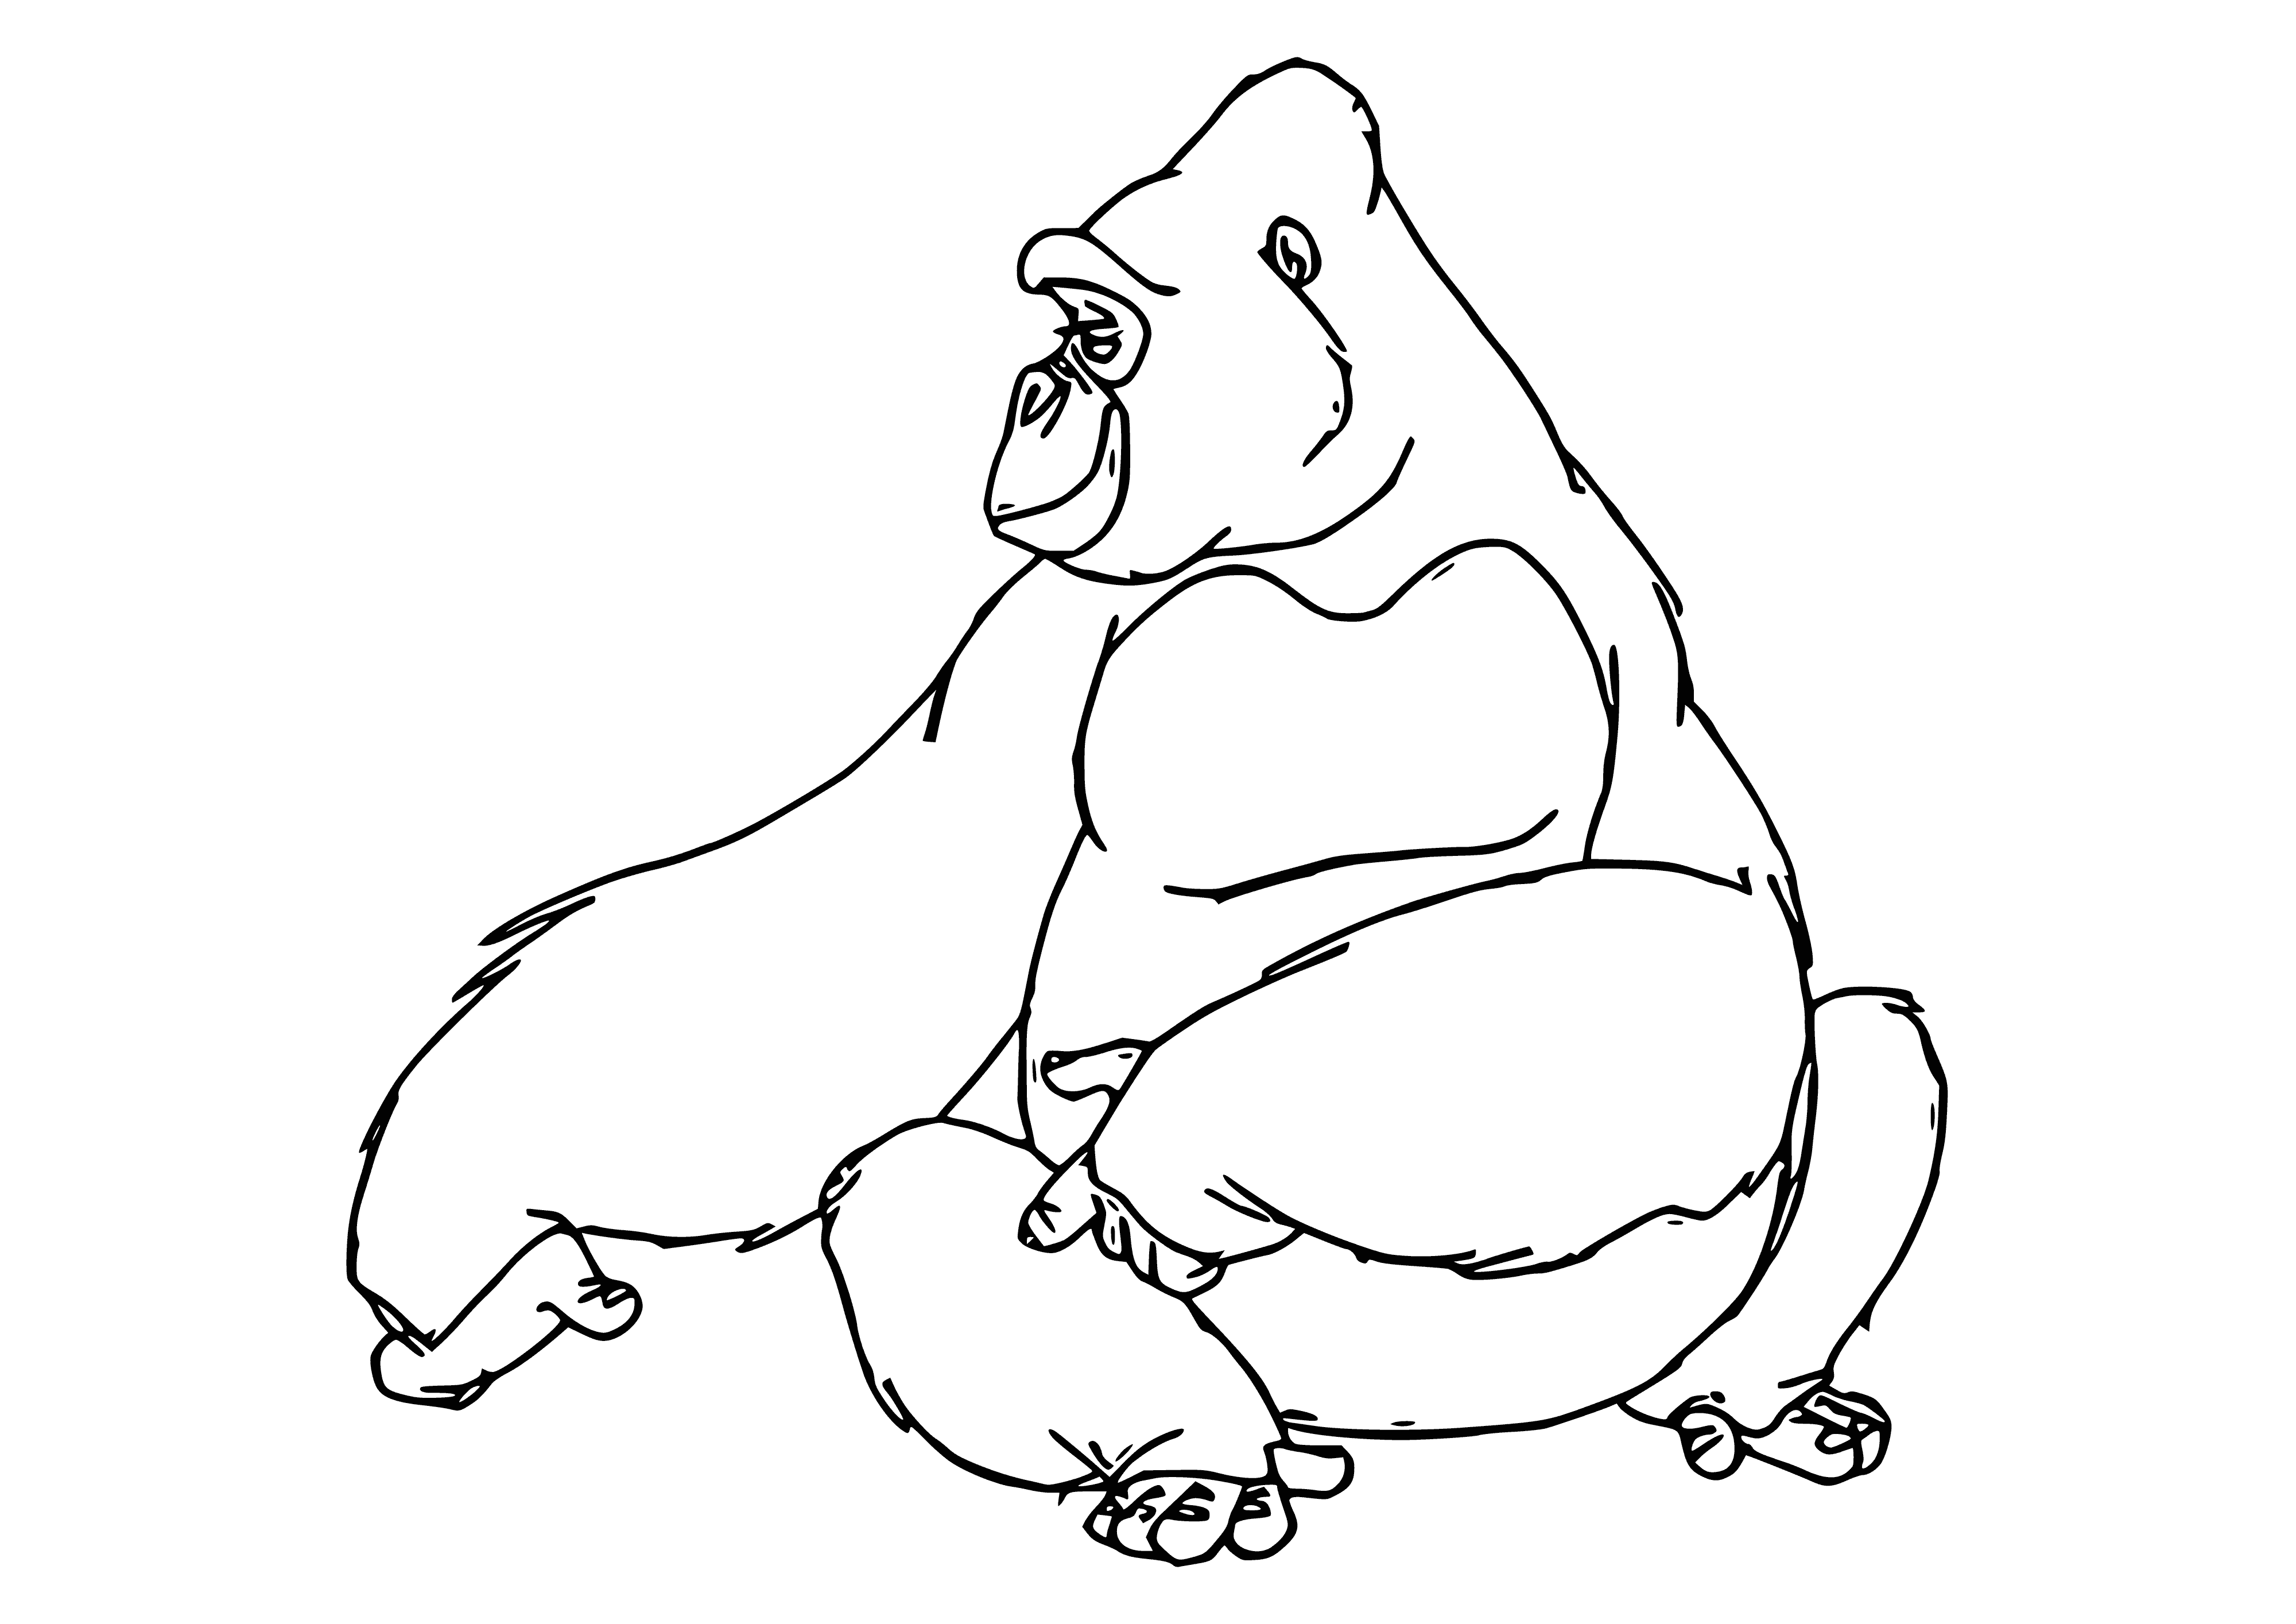 coloring page: A gorilla is standing with fists clenched, snarling in a jungle. It has dark fur, a large head, and long, muscular arms.